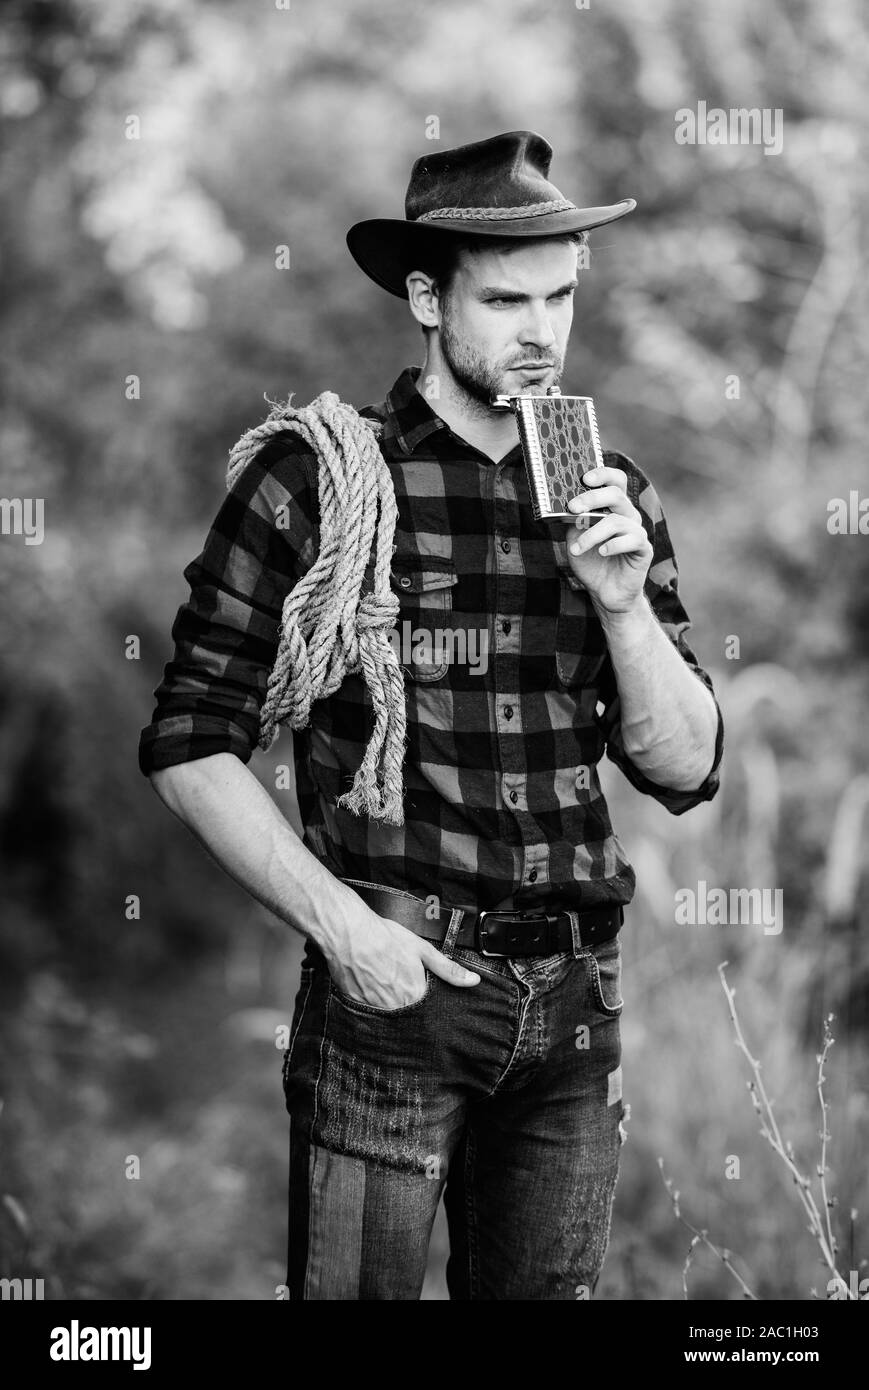 Cowboy ranch worker. Brutal cowboy drinking alcohol. Man handsome cowboy nature background. Bourbon whiskey. Western culture. Man wearing hat hold rope and flask. Lasso tool American cowboy. Stock Photo